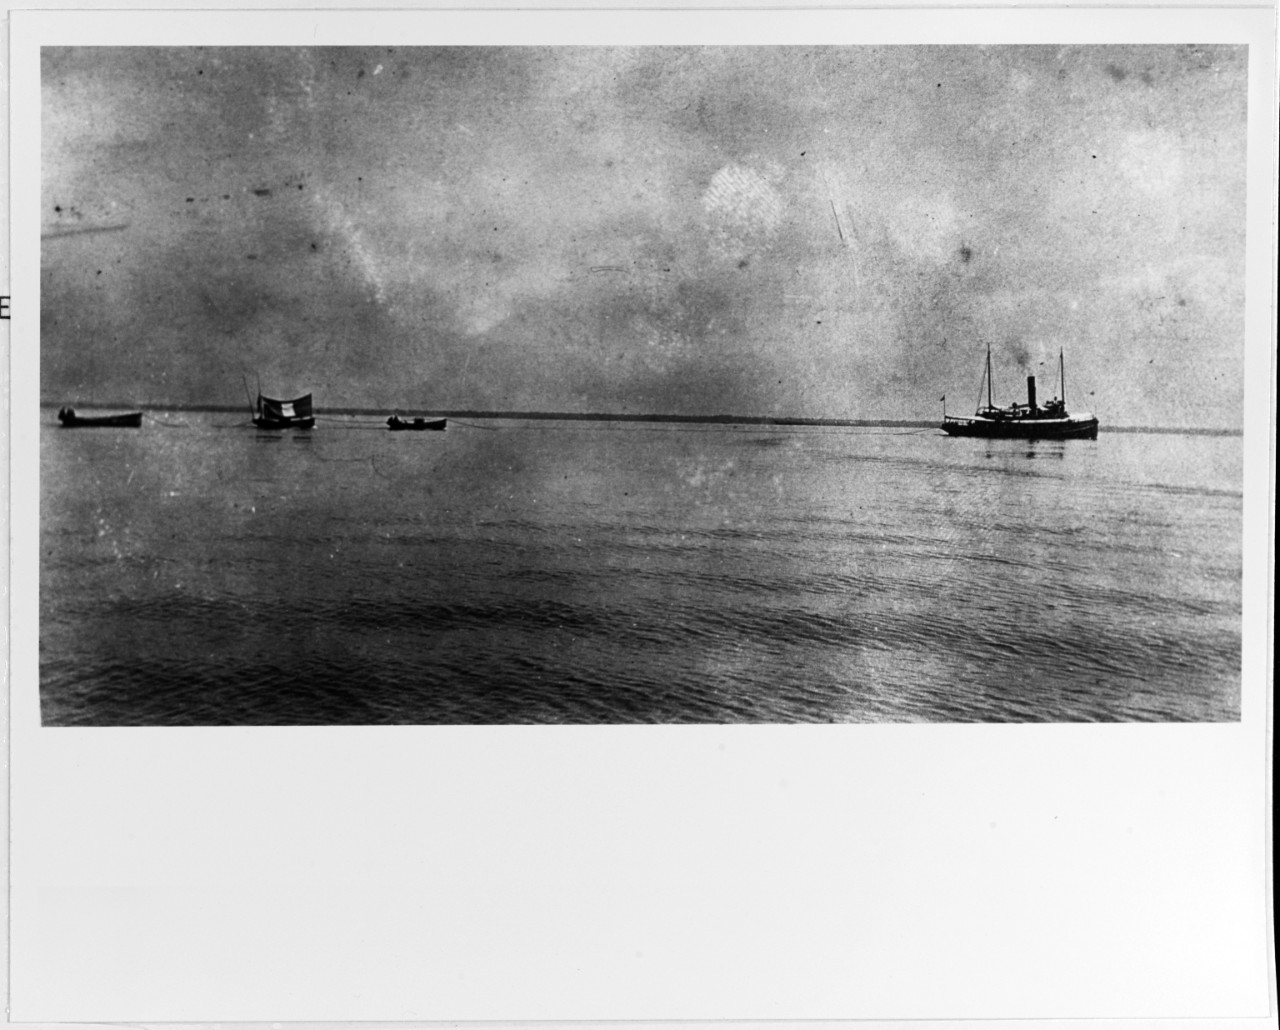 Gunnery target under tow of a tug